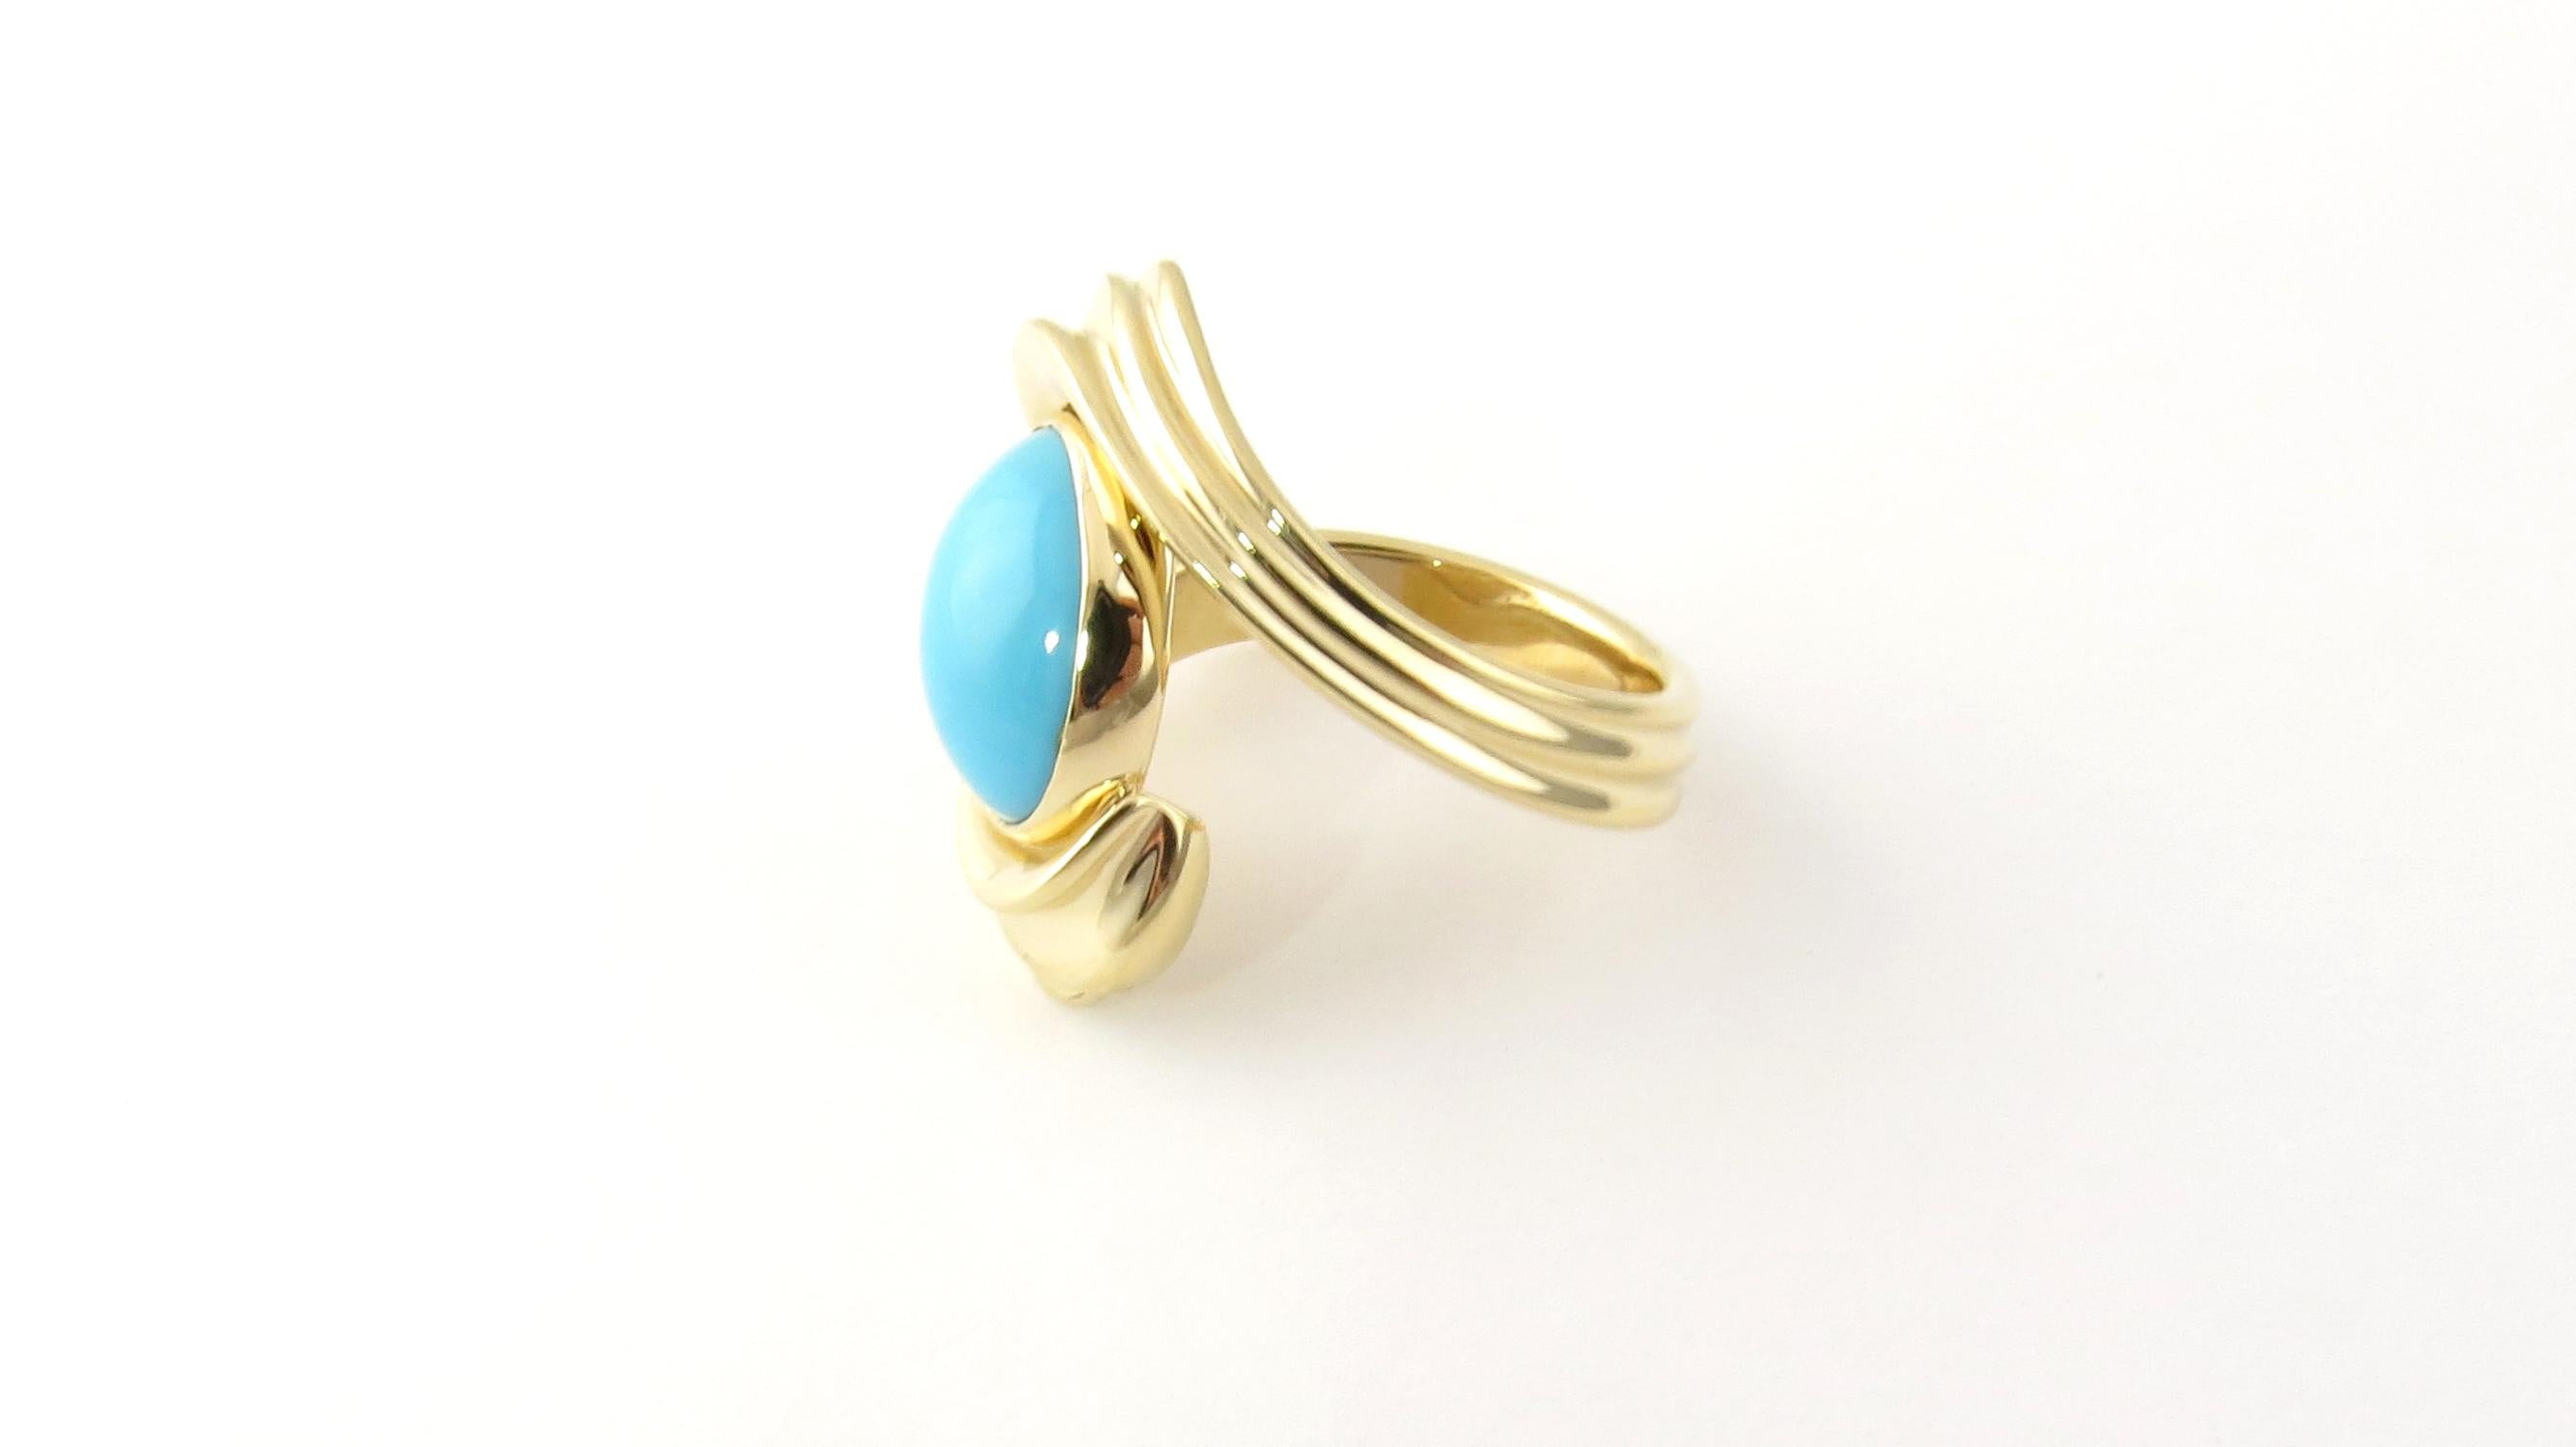 Vintage 14 Karat Yellow Gold Cabochon Turquoise Ring Size 5.75

This lovely ring features one oval cabochon turquoise stone (10 mm x 9 mm) set in beautifully detailed 14K yellow gold. Top of ring measures 21 mm. Shank measures 3.5 mm.

Ring Size: